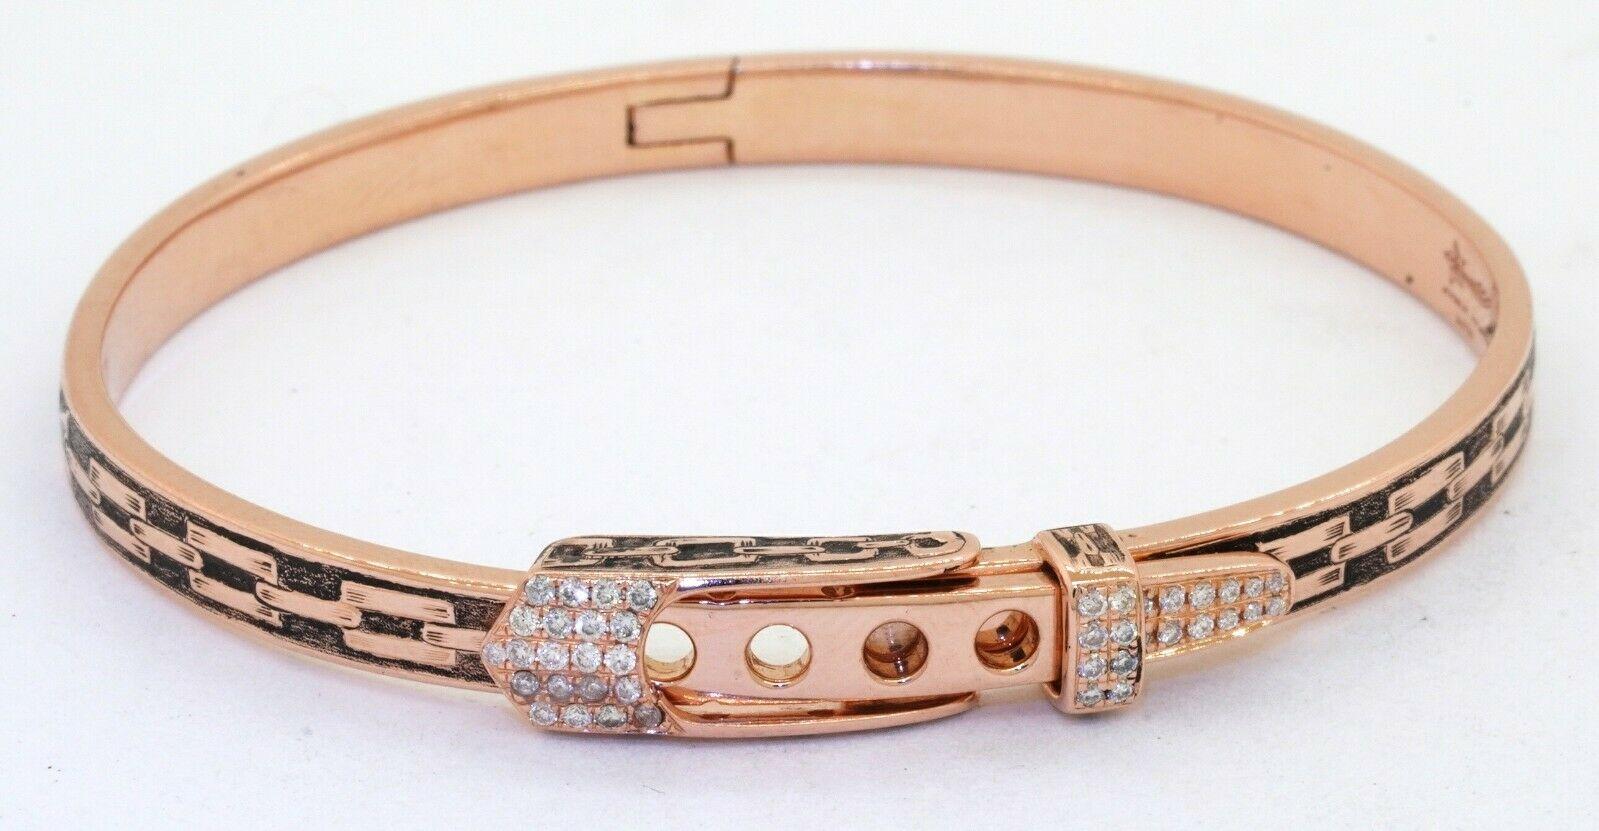 Etoile Filante heavy 18K rose gold 0.20CT diamond belt buckle bracelet. This fashionable piece of jewelry is crafted in beautiful rich 18K rose gold and features multiple Round cut diamonds (SI1 clarity/G color) with a combined weight of approx.